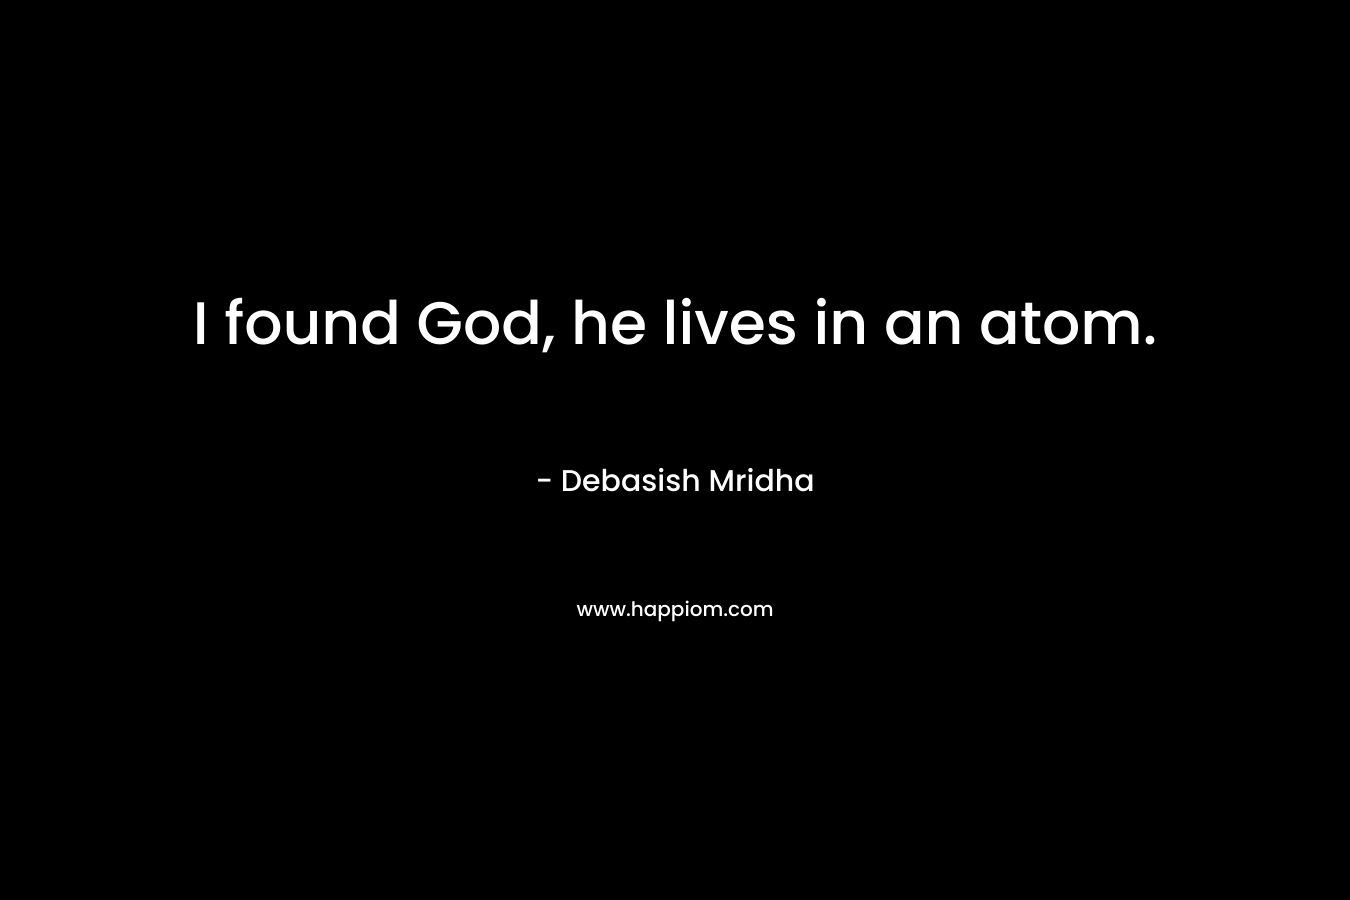 I found God, he lives in an atom.